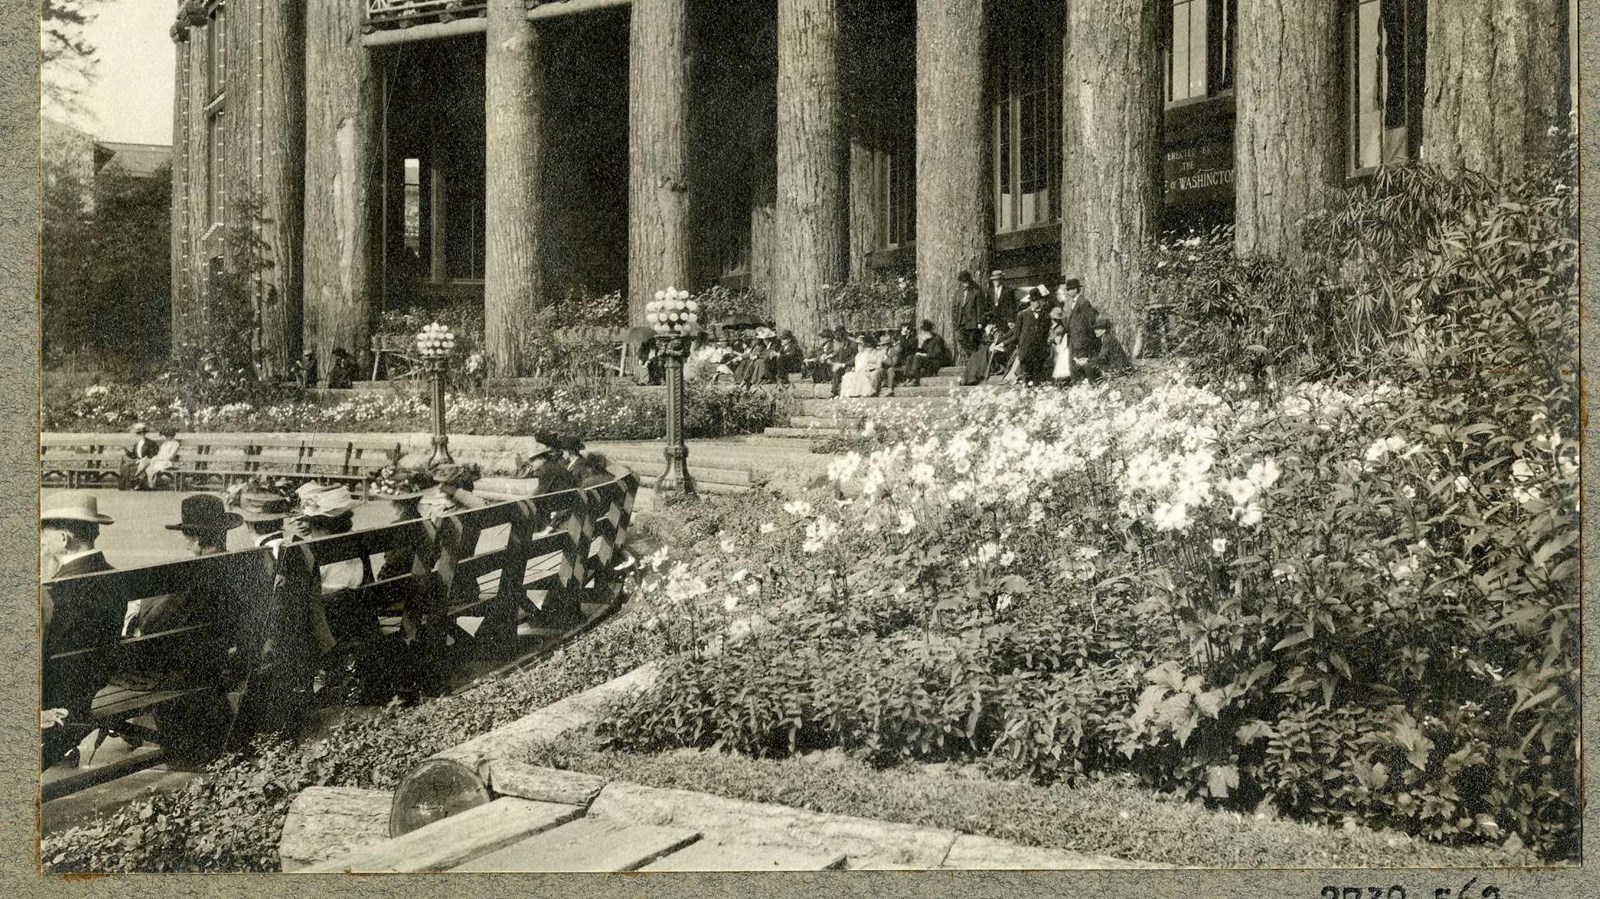 Black and white of large trees behind row of flowers with people standing by trees. 